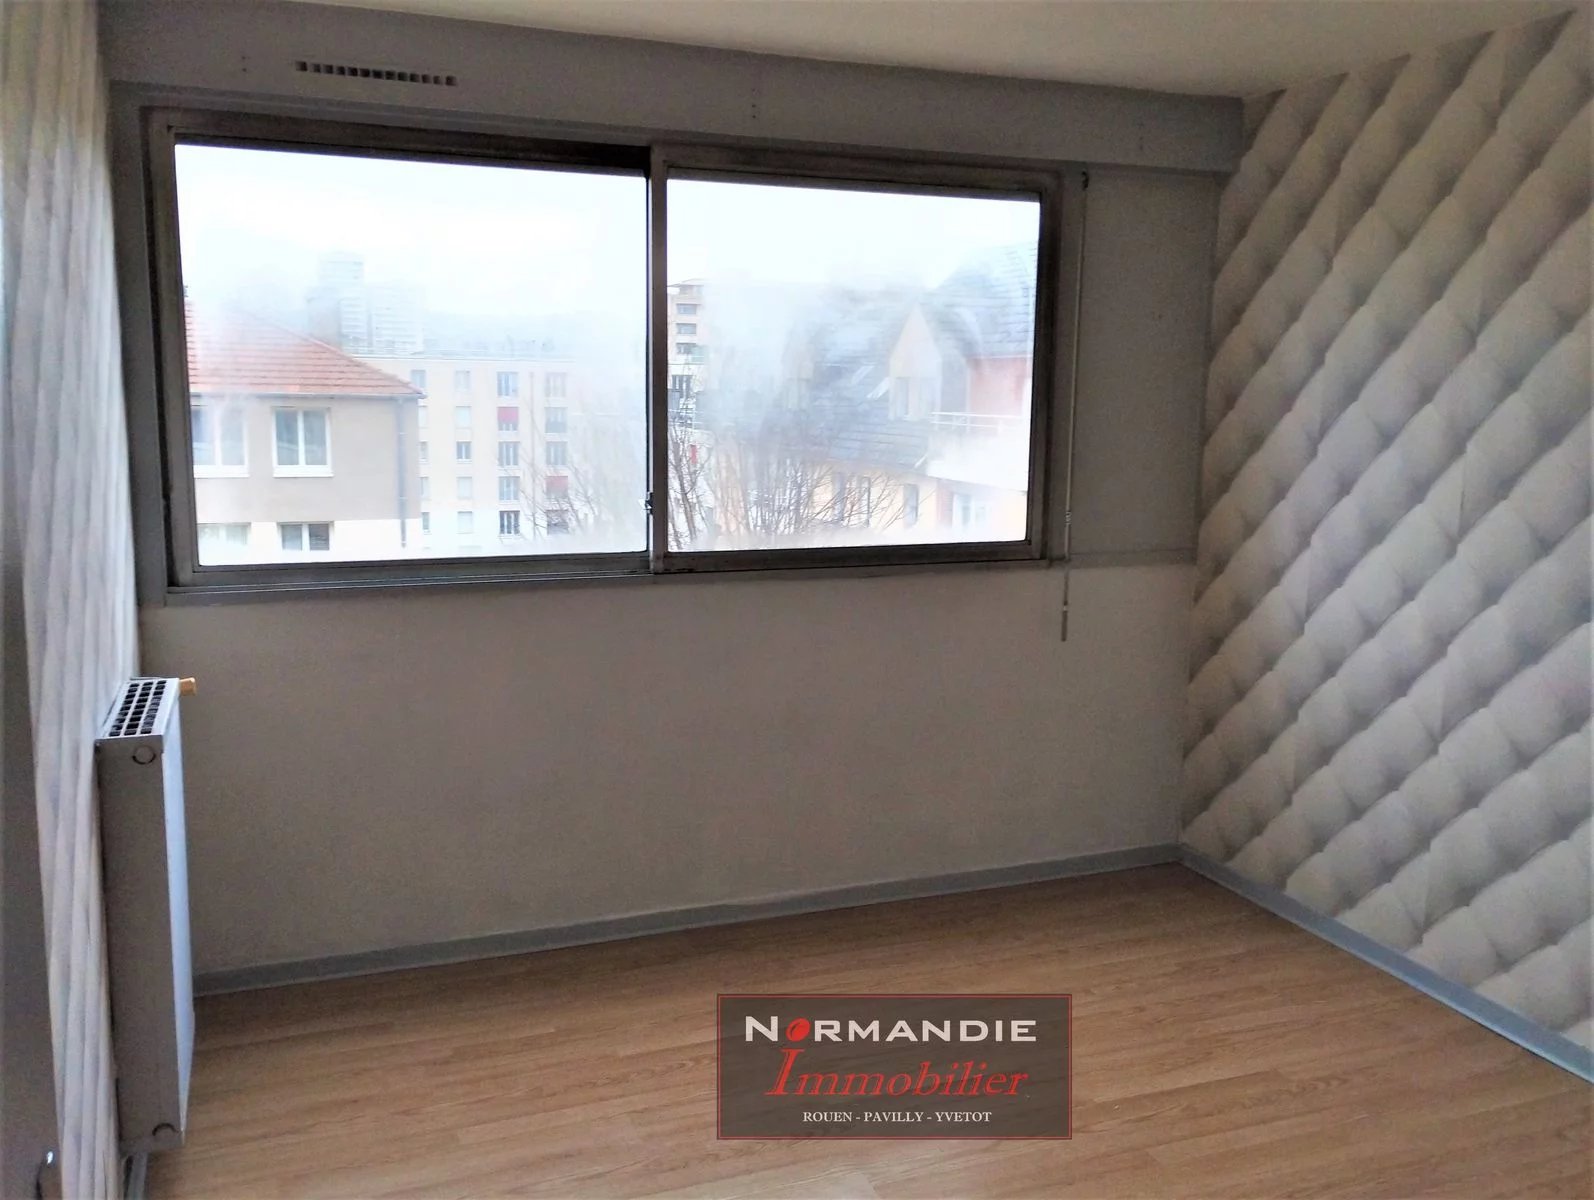 Appartement  104 m²  4  chambres +  2 SDB  + parking